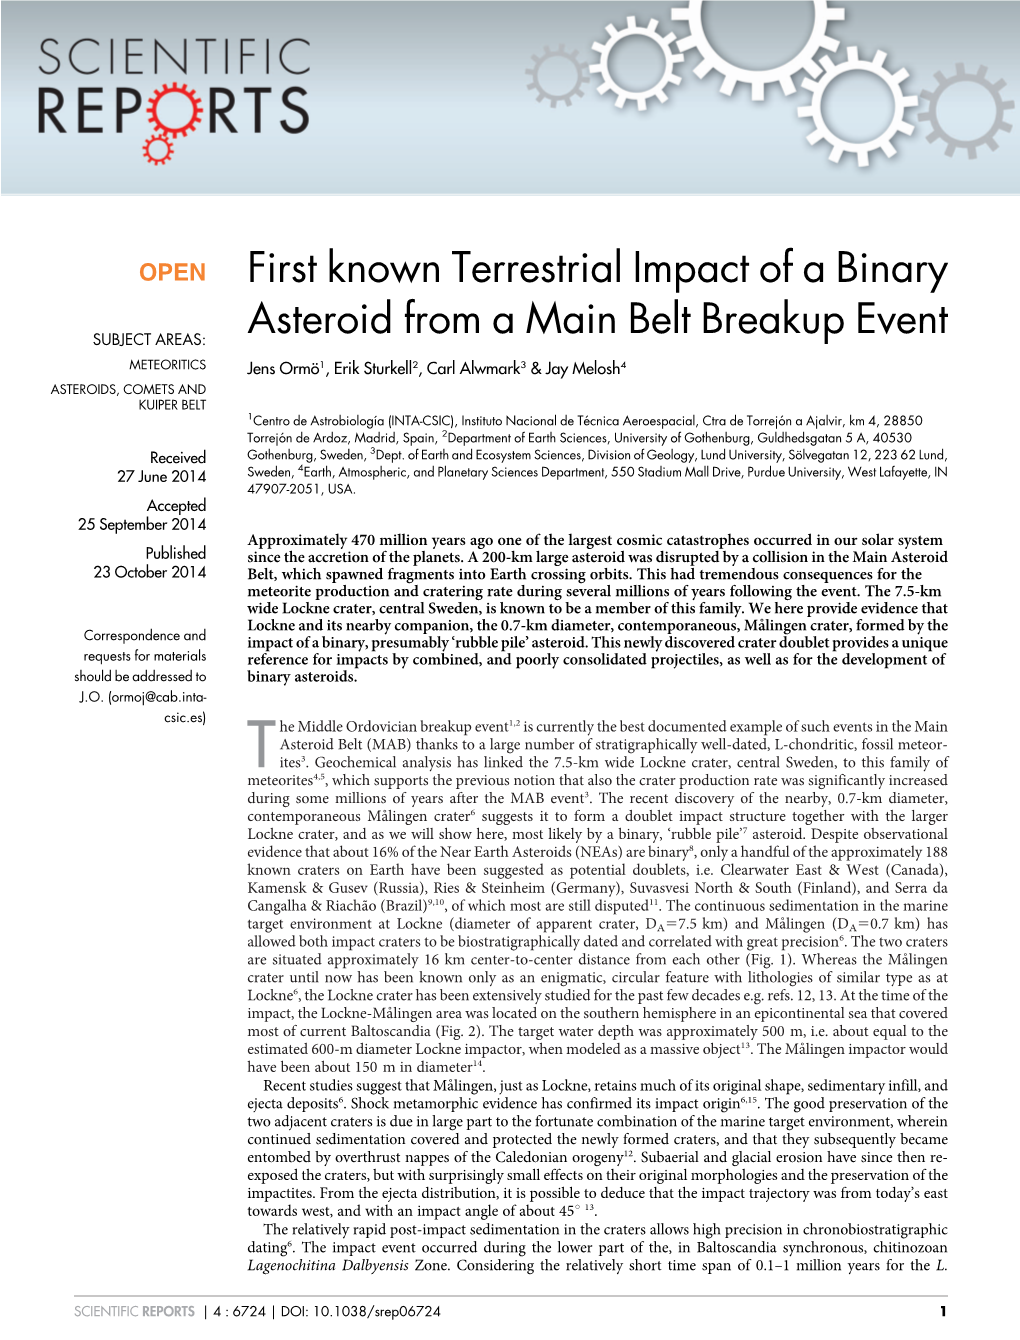 First Known Terrestrial Impact of a Binary Asteroid from a Main Belt